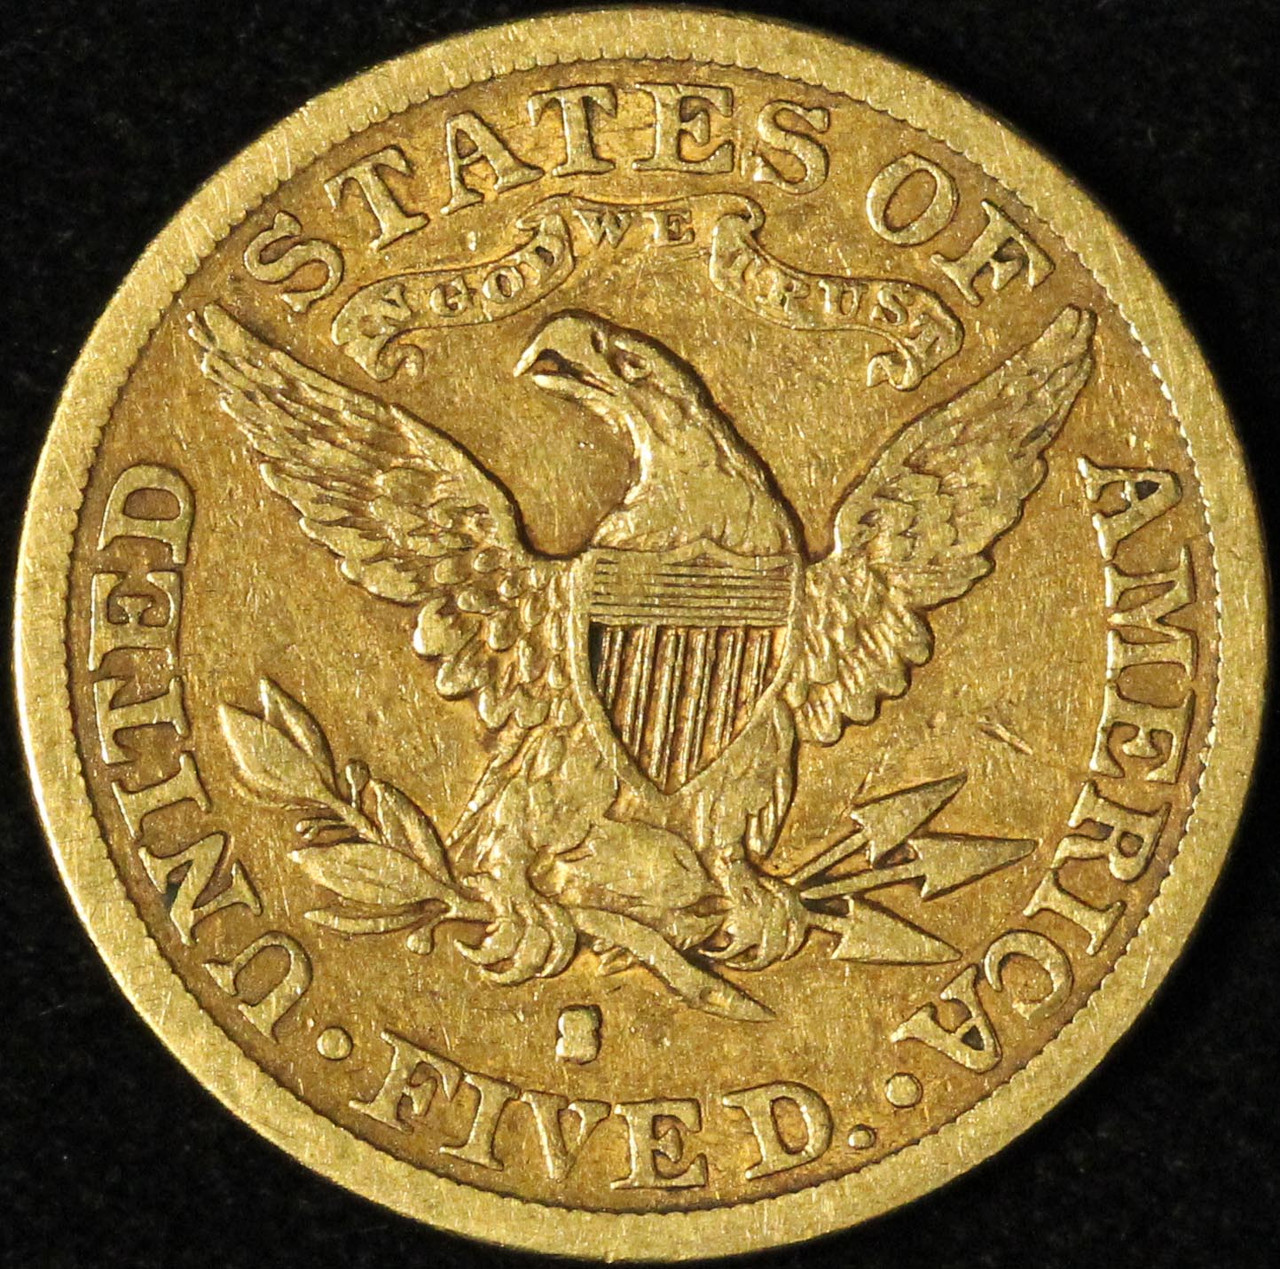 1896-S $5 Gold Liberty Half Eagle - Low Mintage Coin - Free